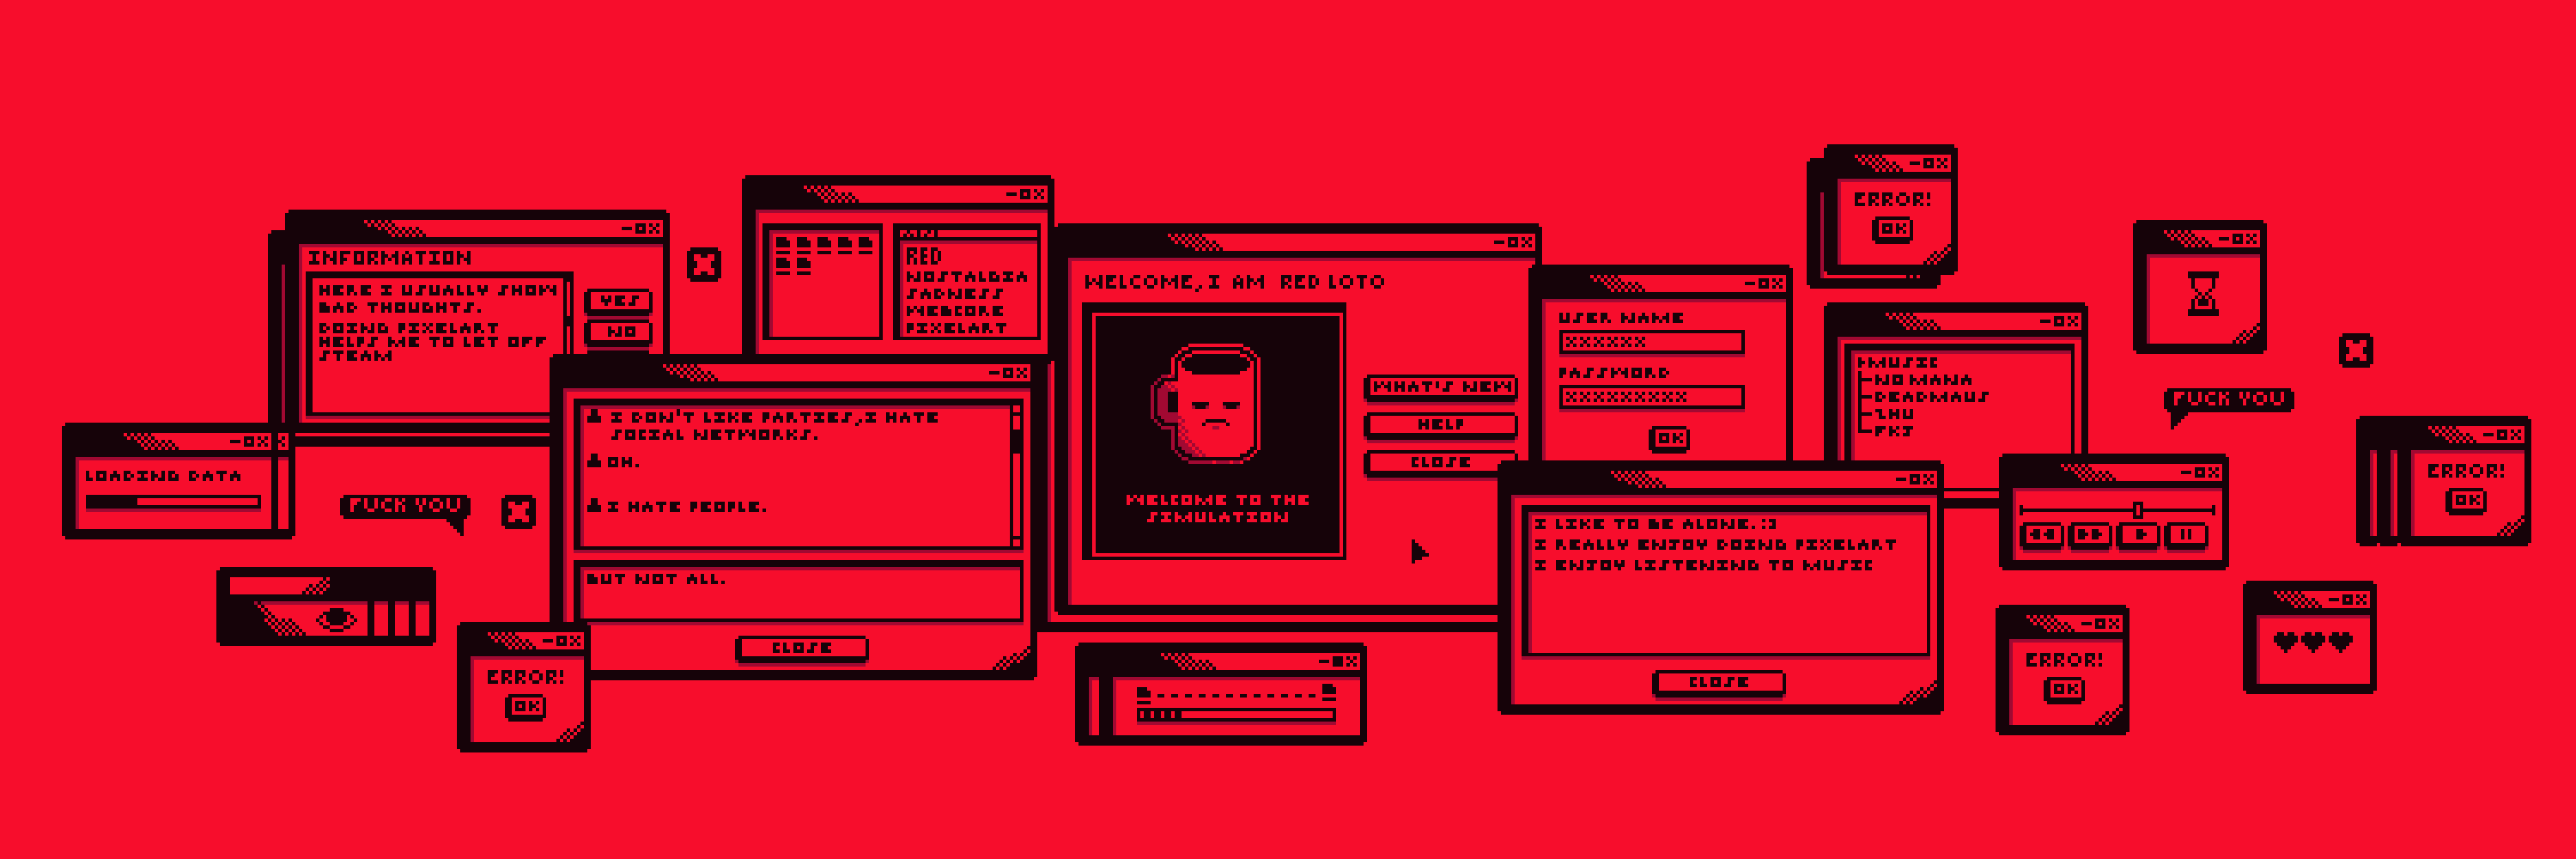 Hello everyone, I'm a pixelart artist, usually i only use this red color palette but i try to simulate an aesthetic similar to Windows and old internet, i guess it's a kind